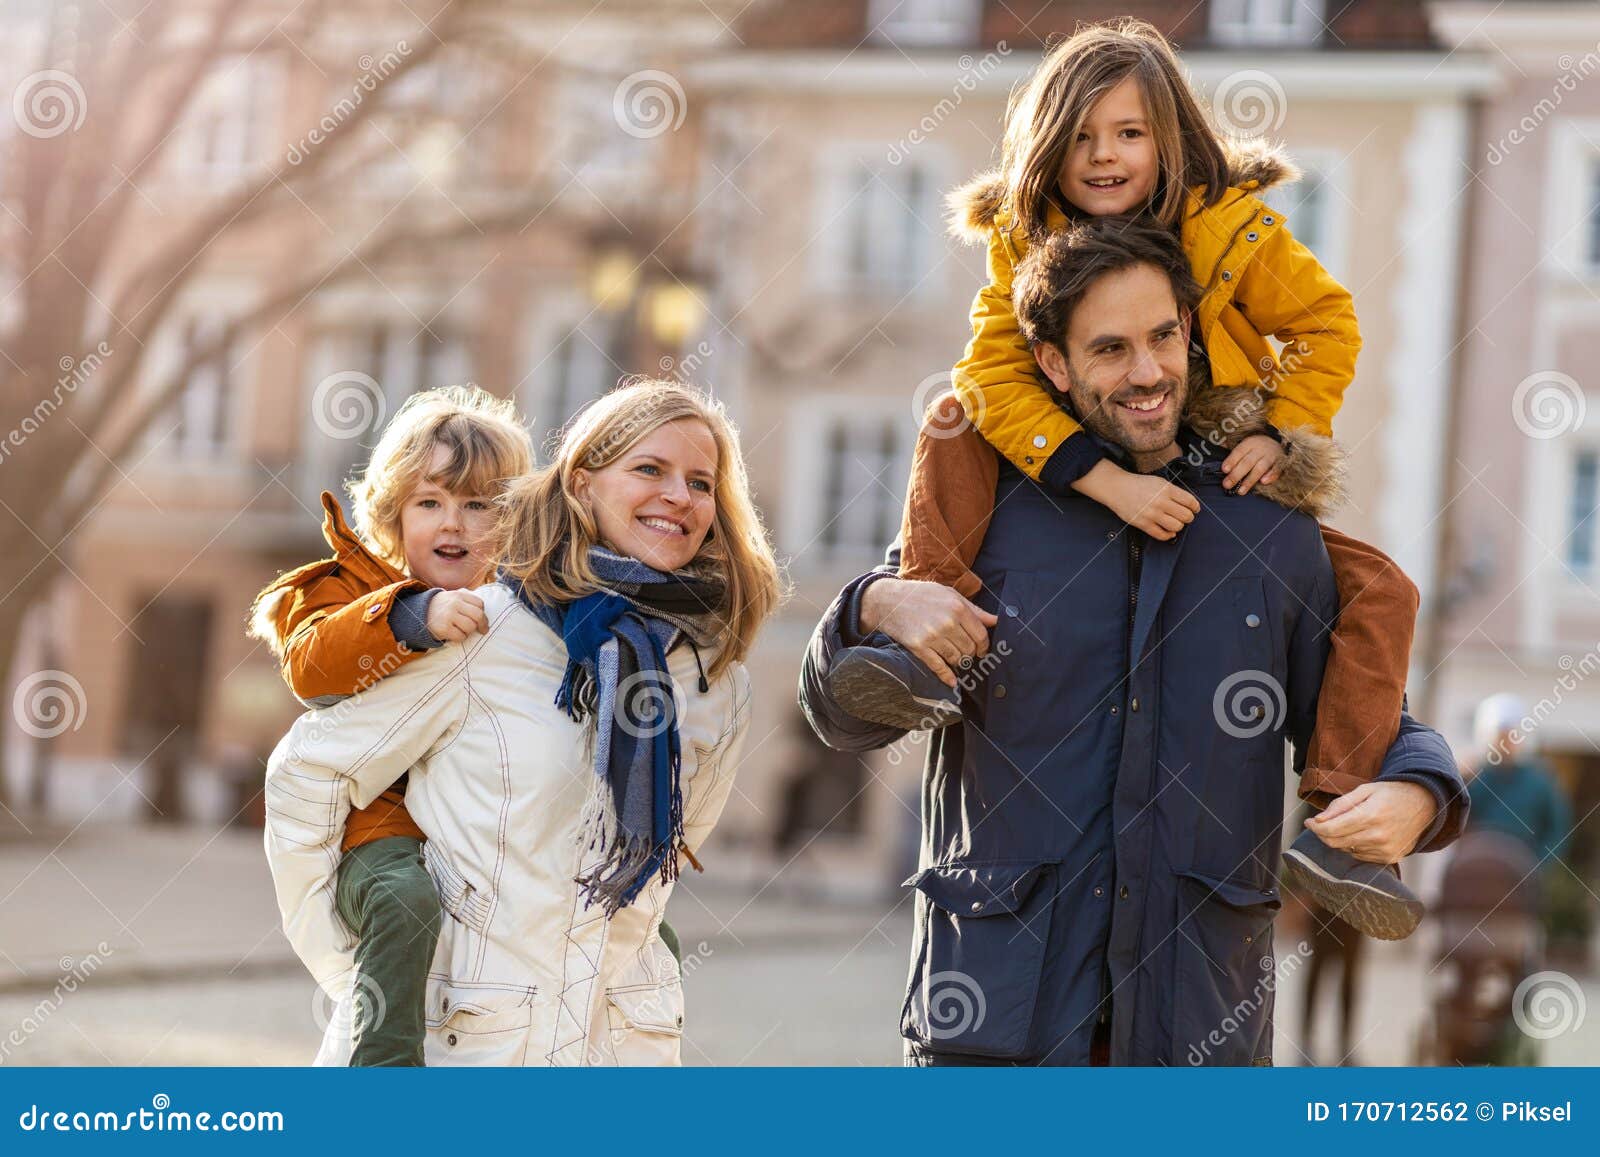 Young Family Enjoying Their Day in a City Stock Photo - Image of